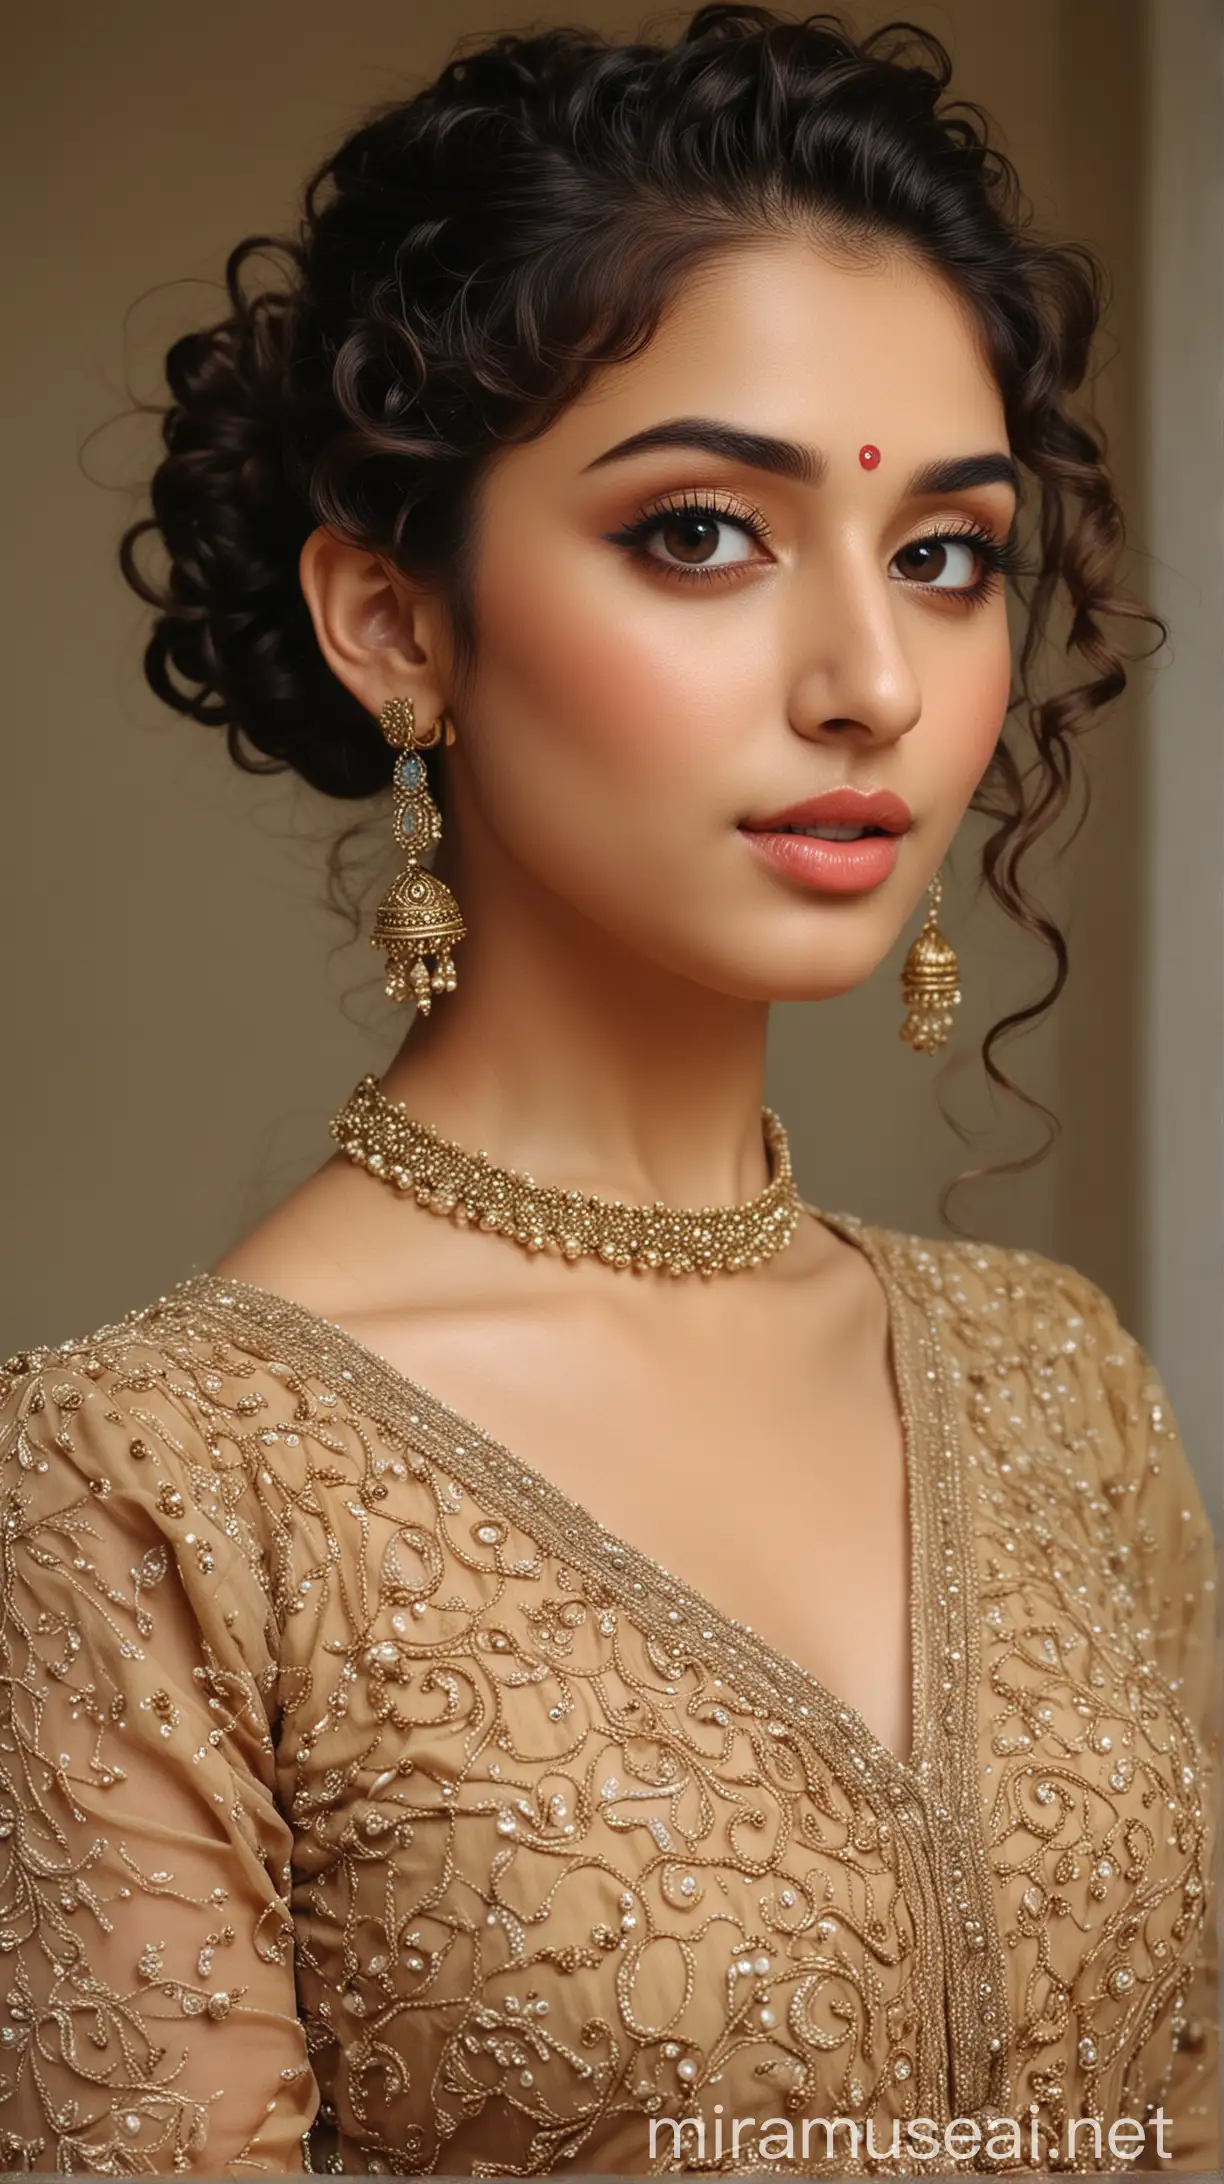 Beautiful Pakistani Girl with Curly Bun Hairstyle and Indian Makeup in Attractive Dress Medium Shot Ultra Realistic Full HD Photography